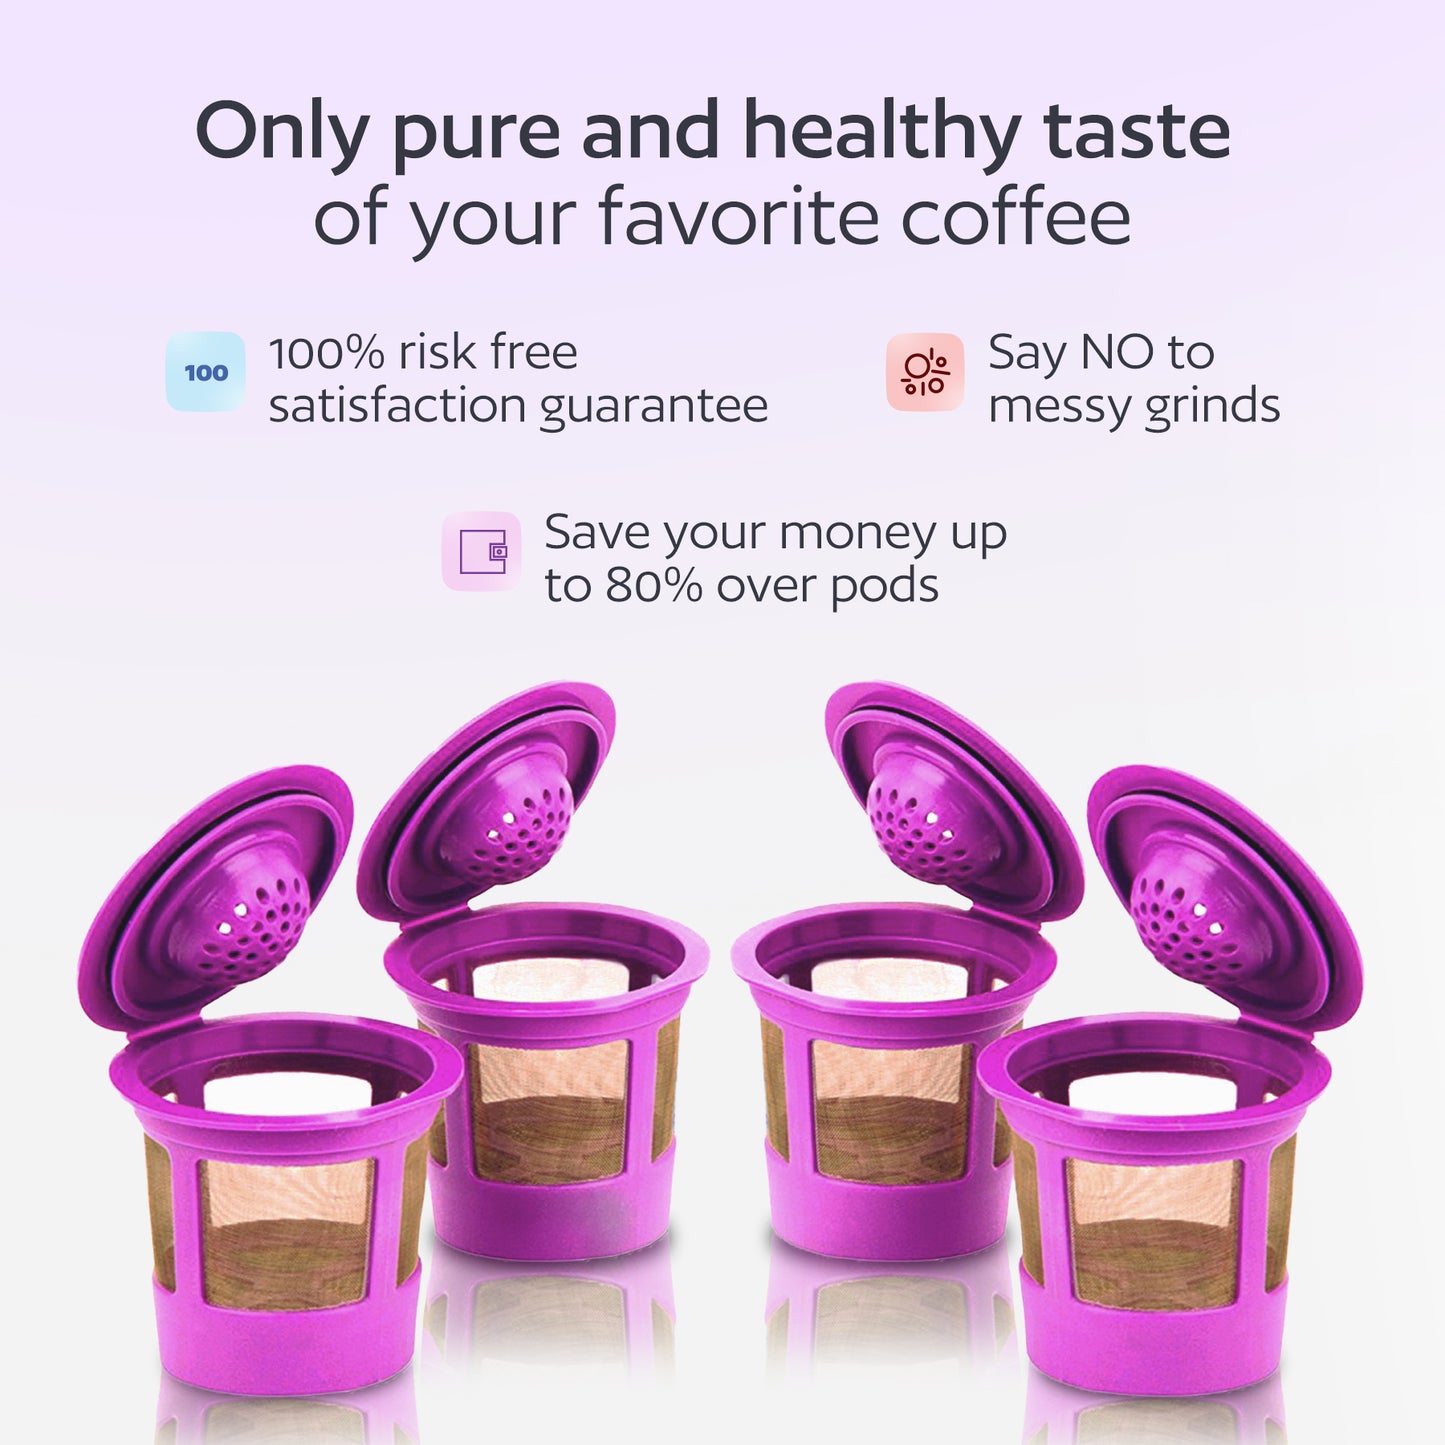 6 Reusable K Cups for Keurig Coffee Makers - BPA Free Universal Fit Purple Refillable Kcups Coffee Filters for 1.0 and 2.0 Keurig Brewers